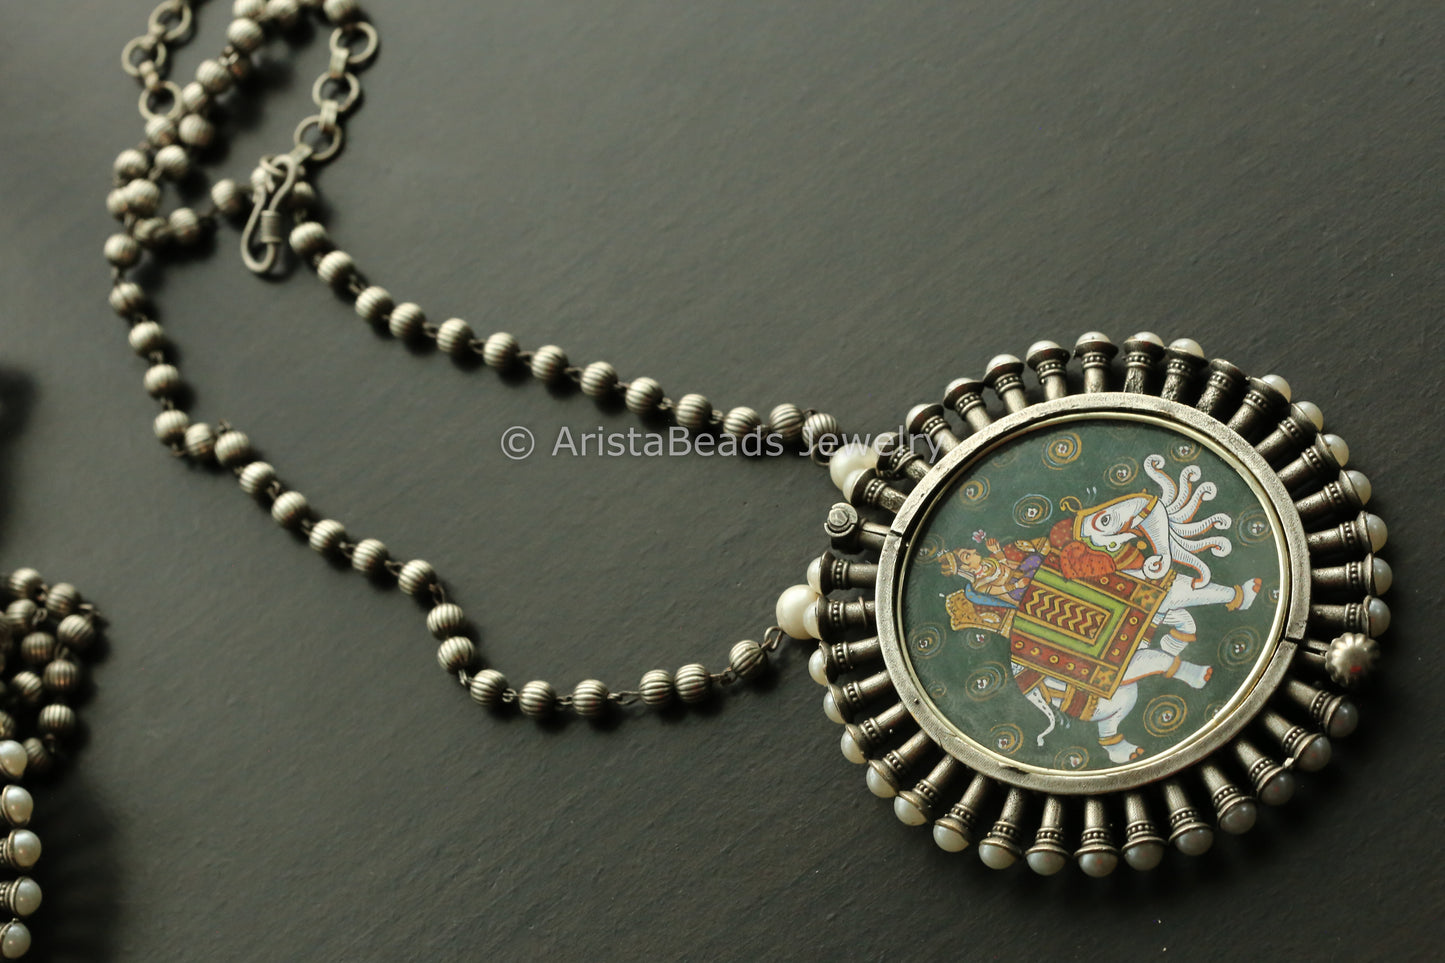 Oxidized Hand-Painted Necklace - Design 1